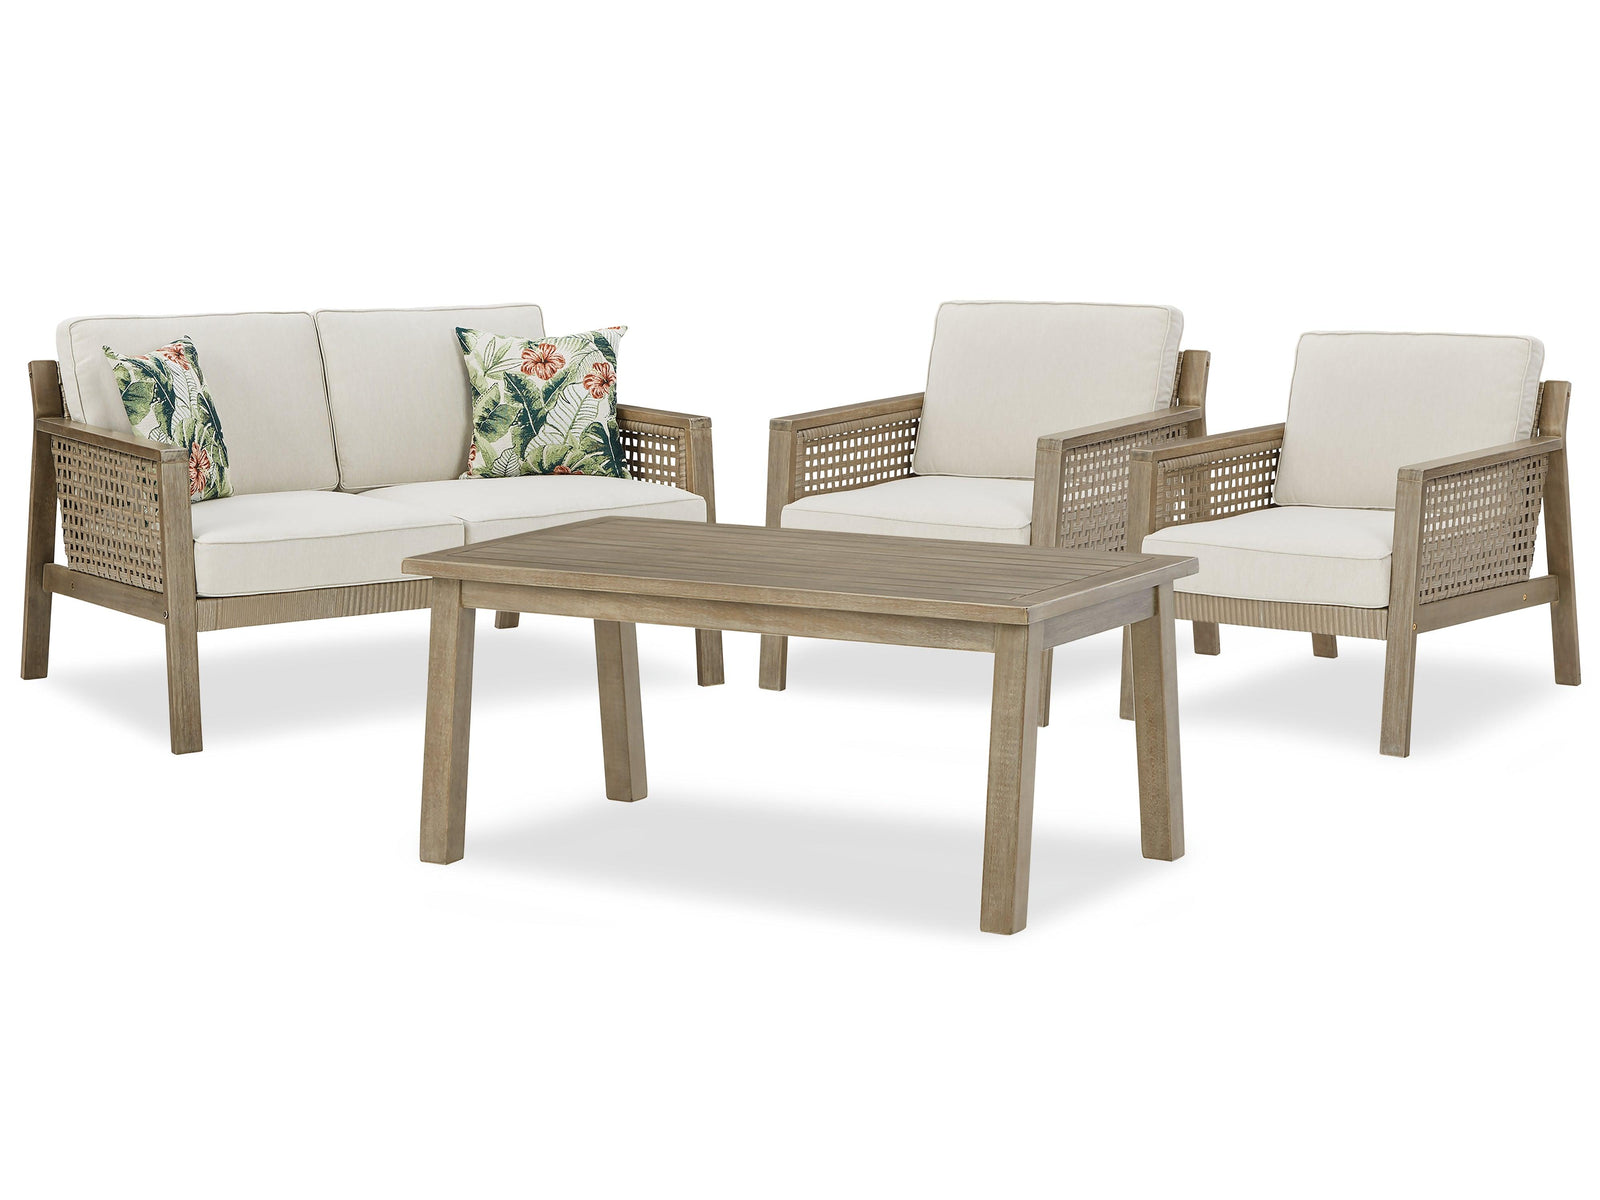 Barn Brown Cove Outdoor Loveseat And 2 Chairs With Coffee Table